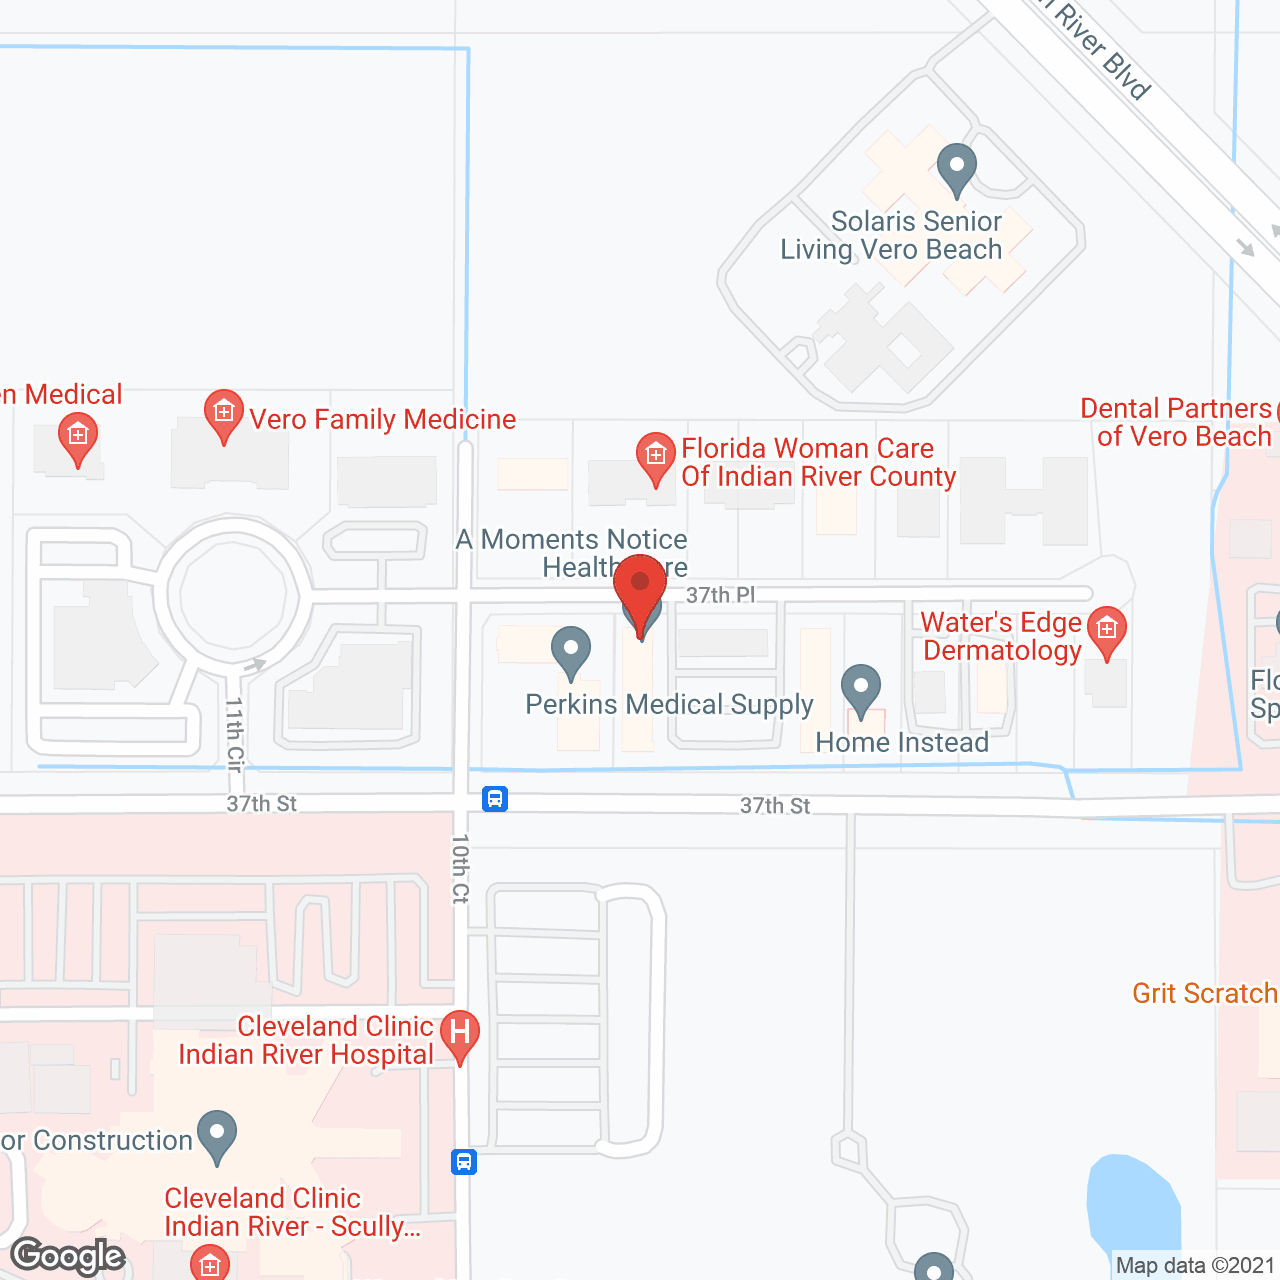 A Moments Notice Health Care in google map